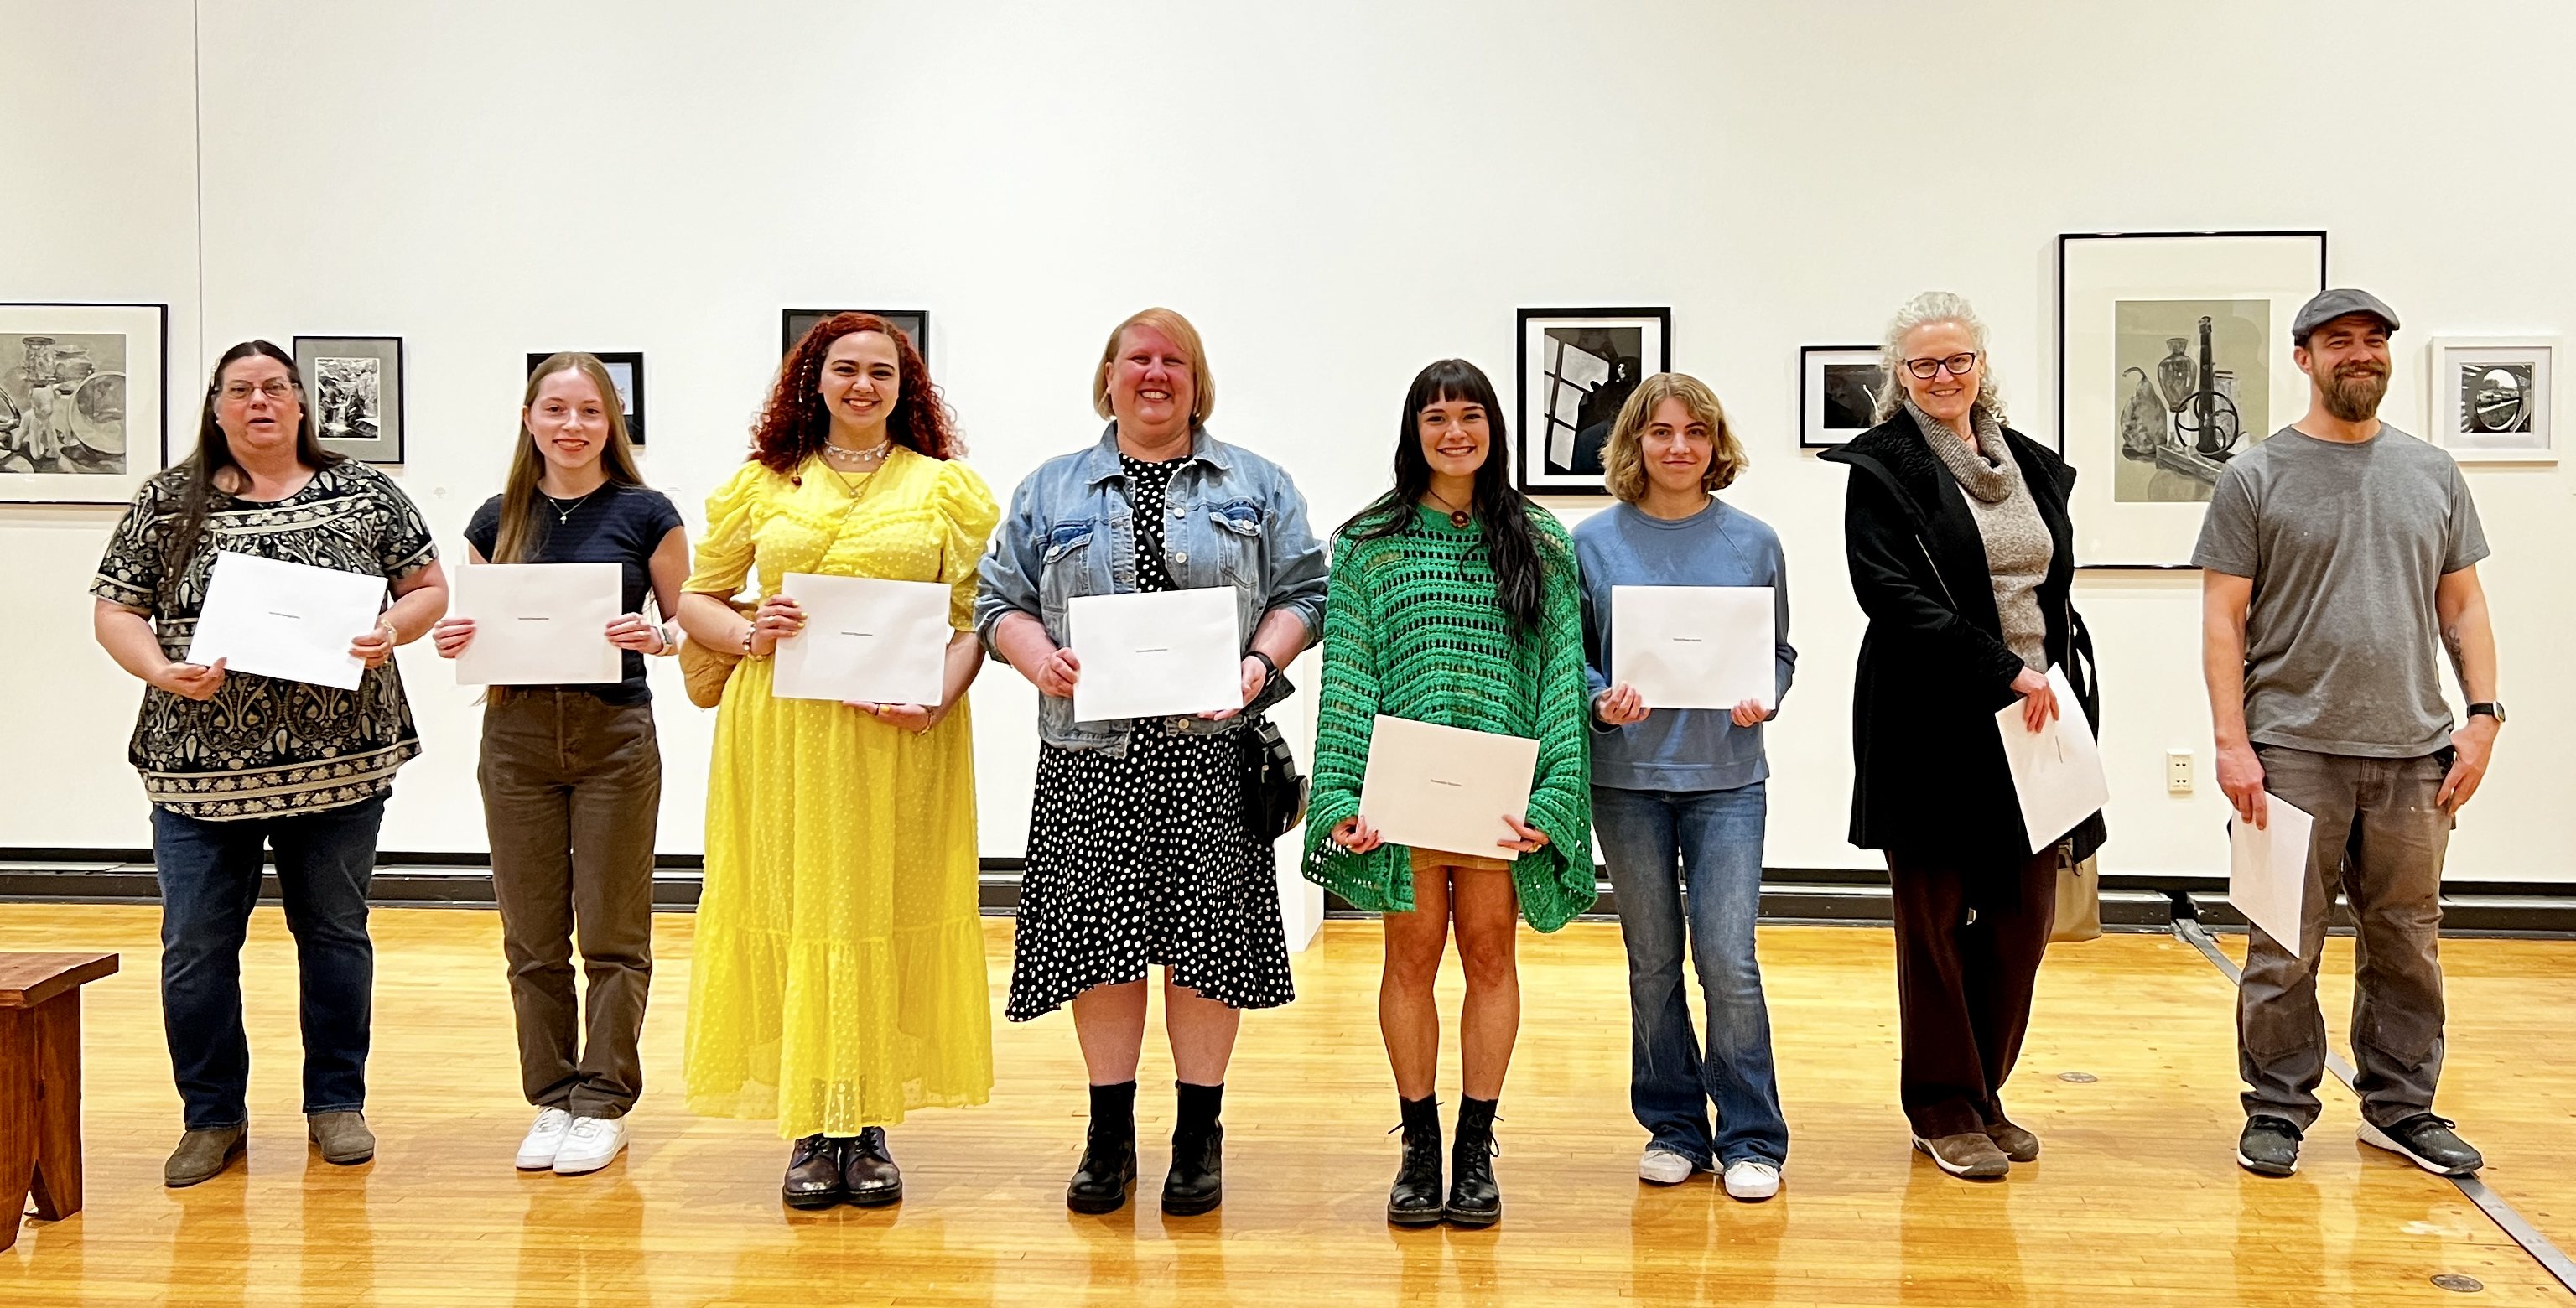 Pictured from left to right are the winners of the 2023 L&C Student Art Exhibition: Kayla Rudolph, Laura Perry, Mary Curvey, Madison Baca, Jeannette Carrington, Ryan Kuhn, Grace Becker, Laura Shansey and Daniel McDonald. NATHAN WOODSIDE/L&C MARKETING & PR